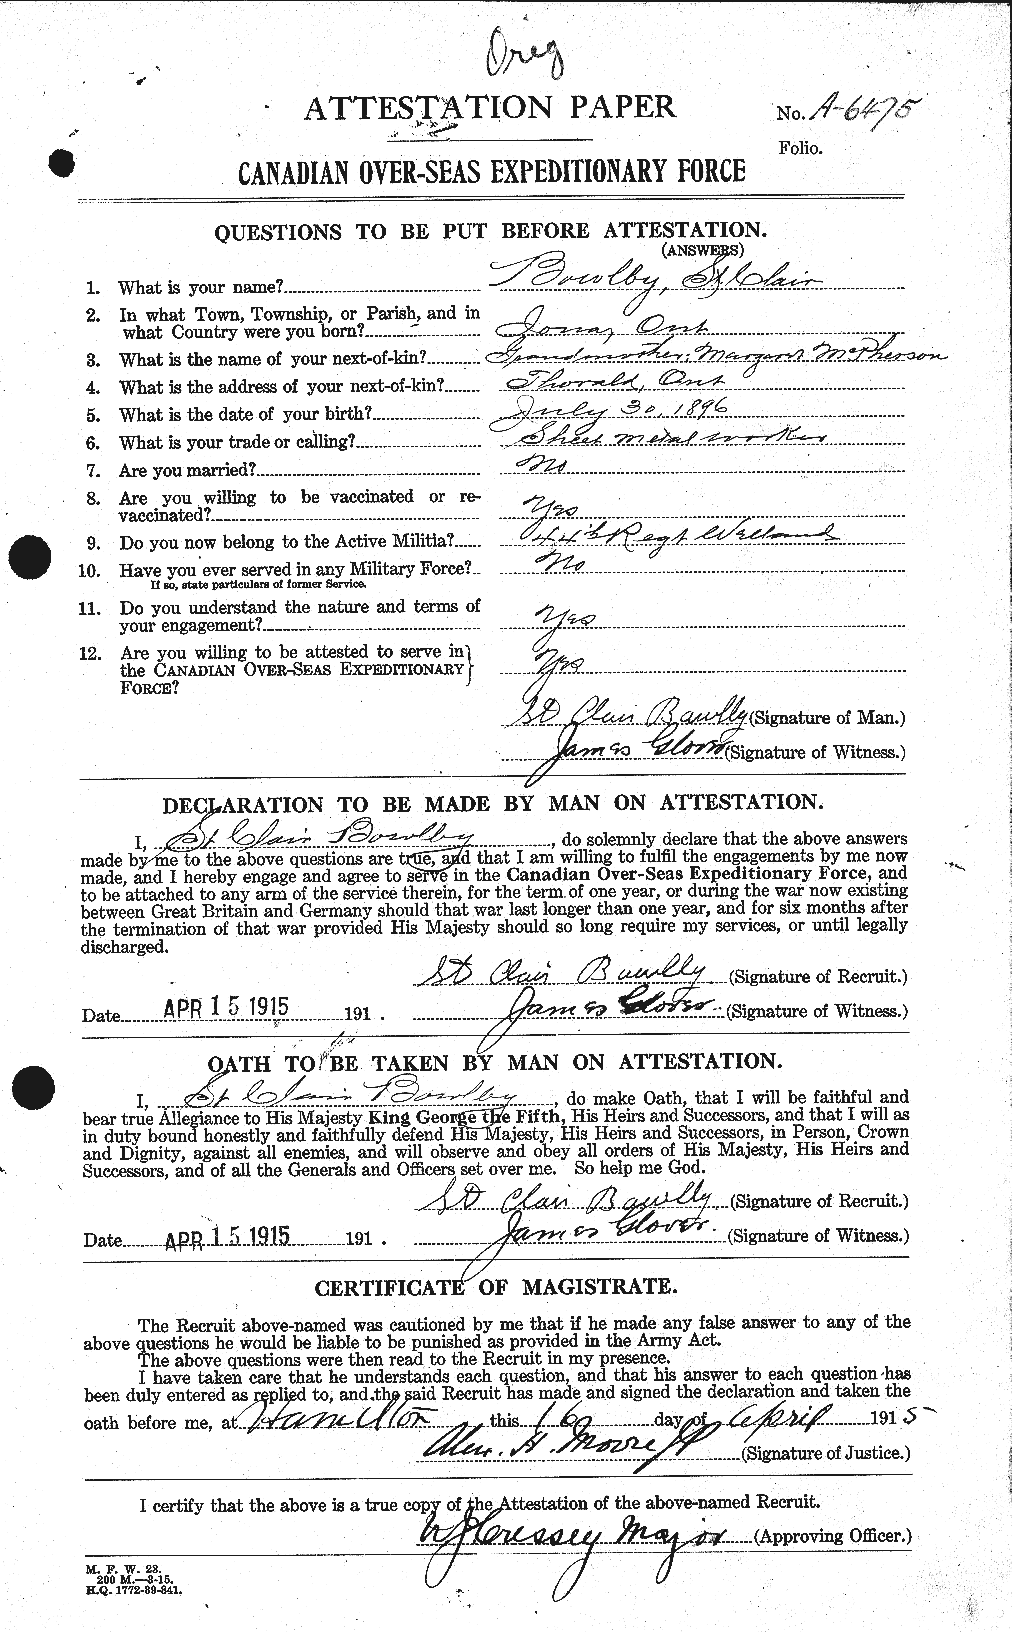 Personnel Records of the First World War - CEF 253802a